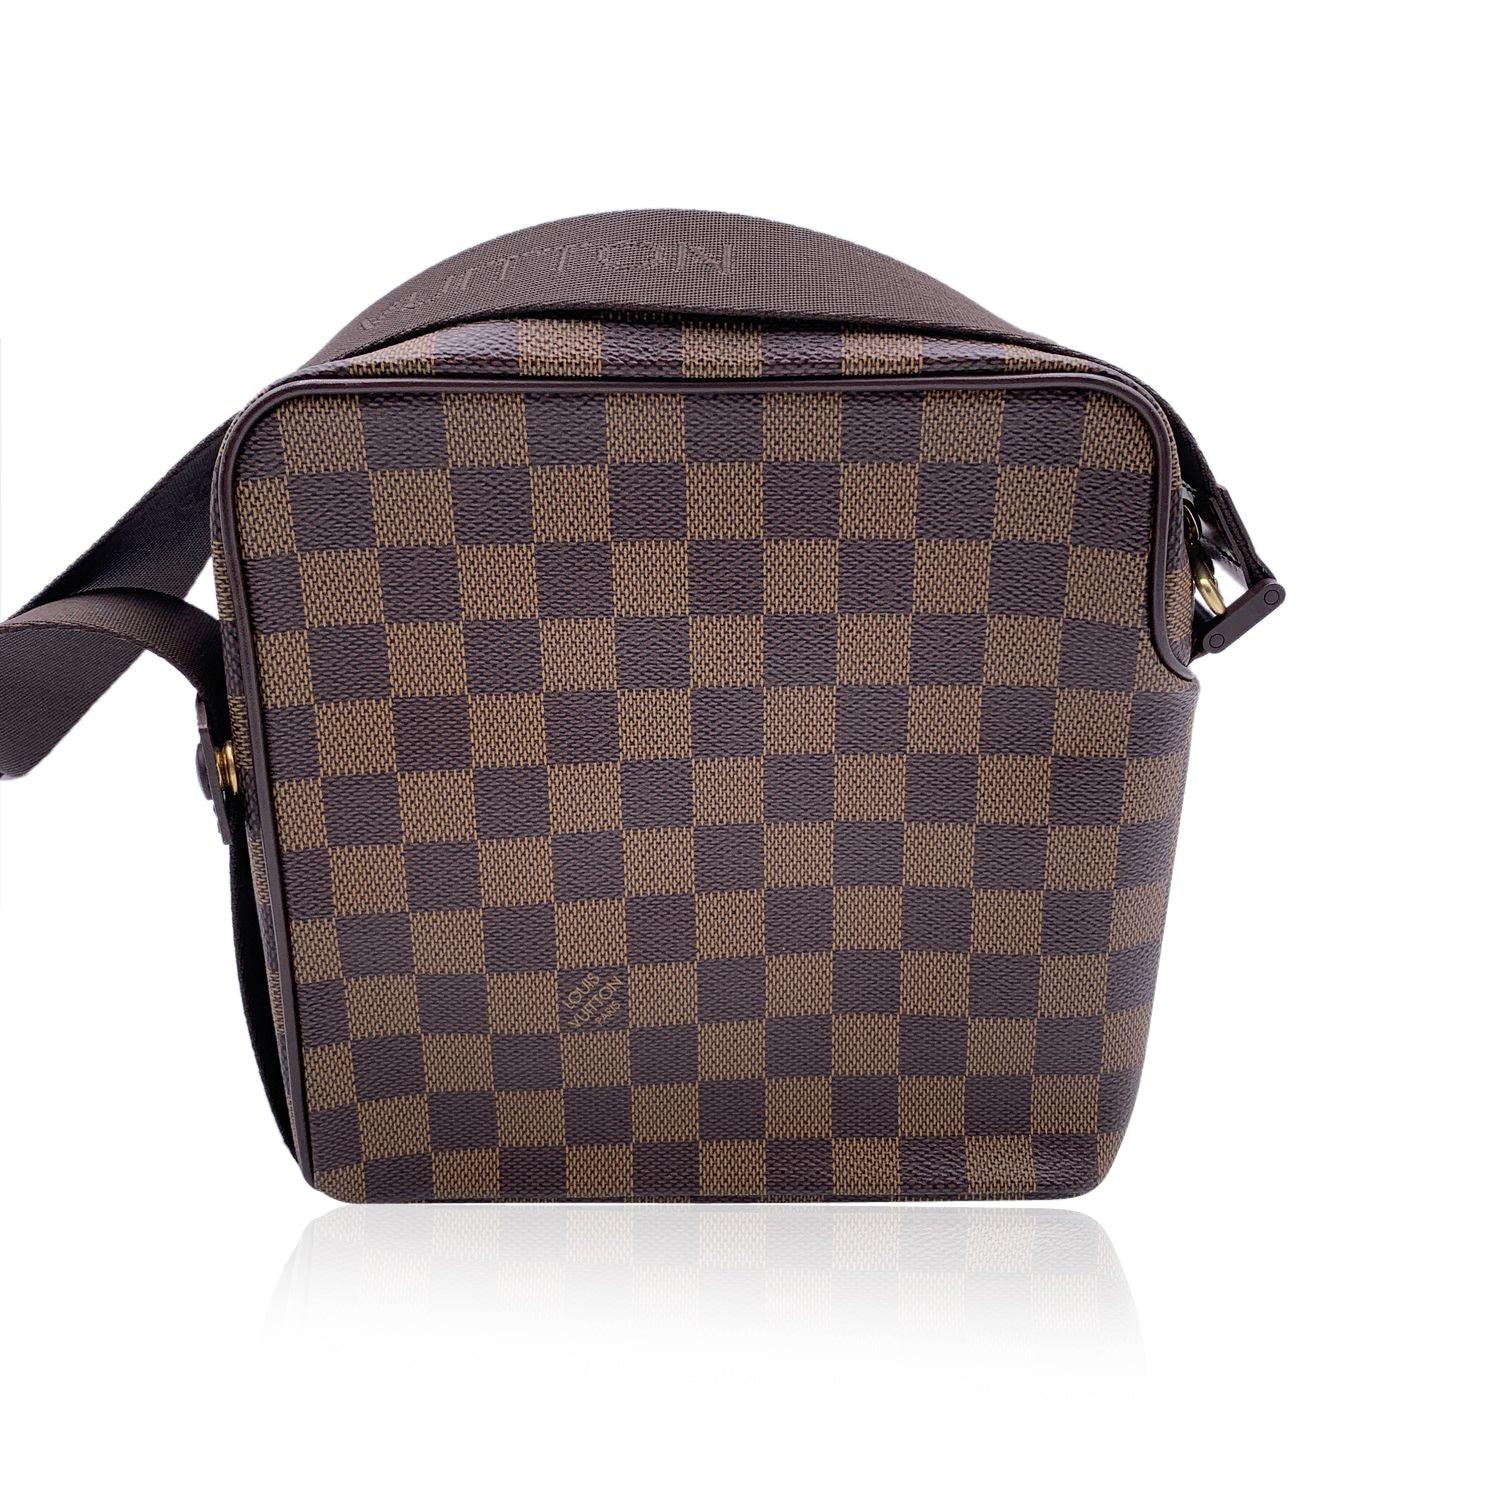 Louis Vuitton Damier Ebene Canvas Olav PM Messenger Bag N41442 In Excellent Condition For Sale In Rome, Rome